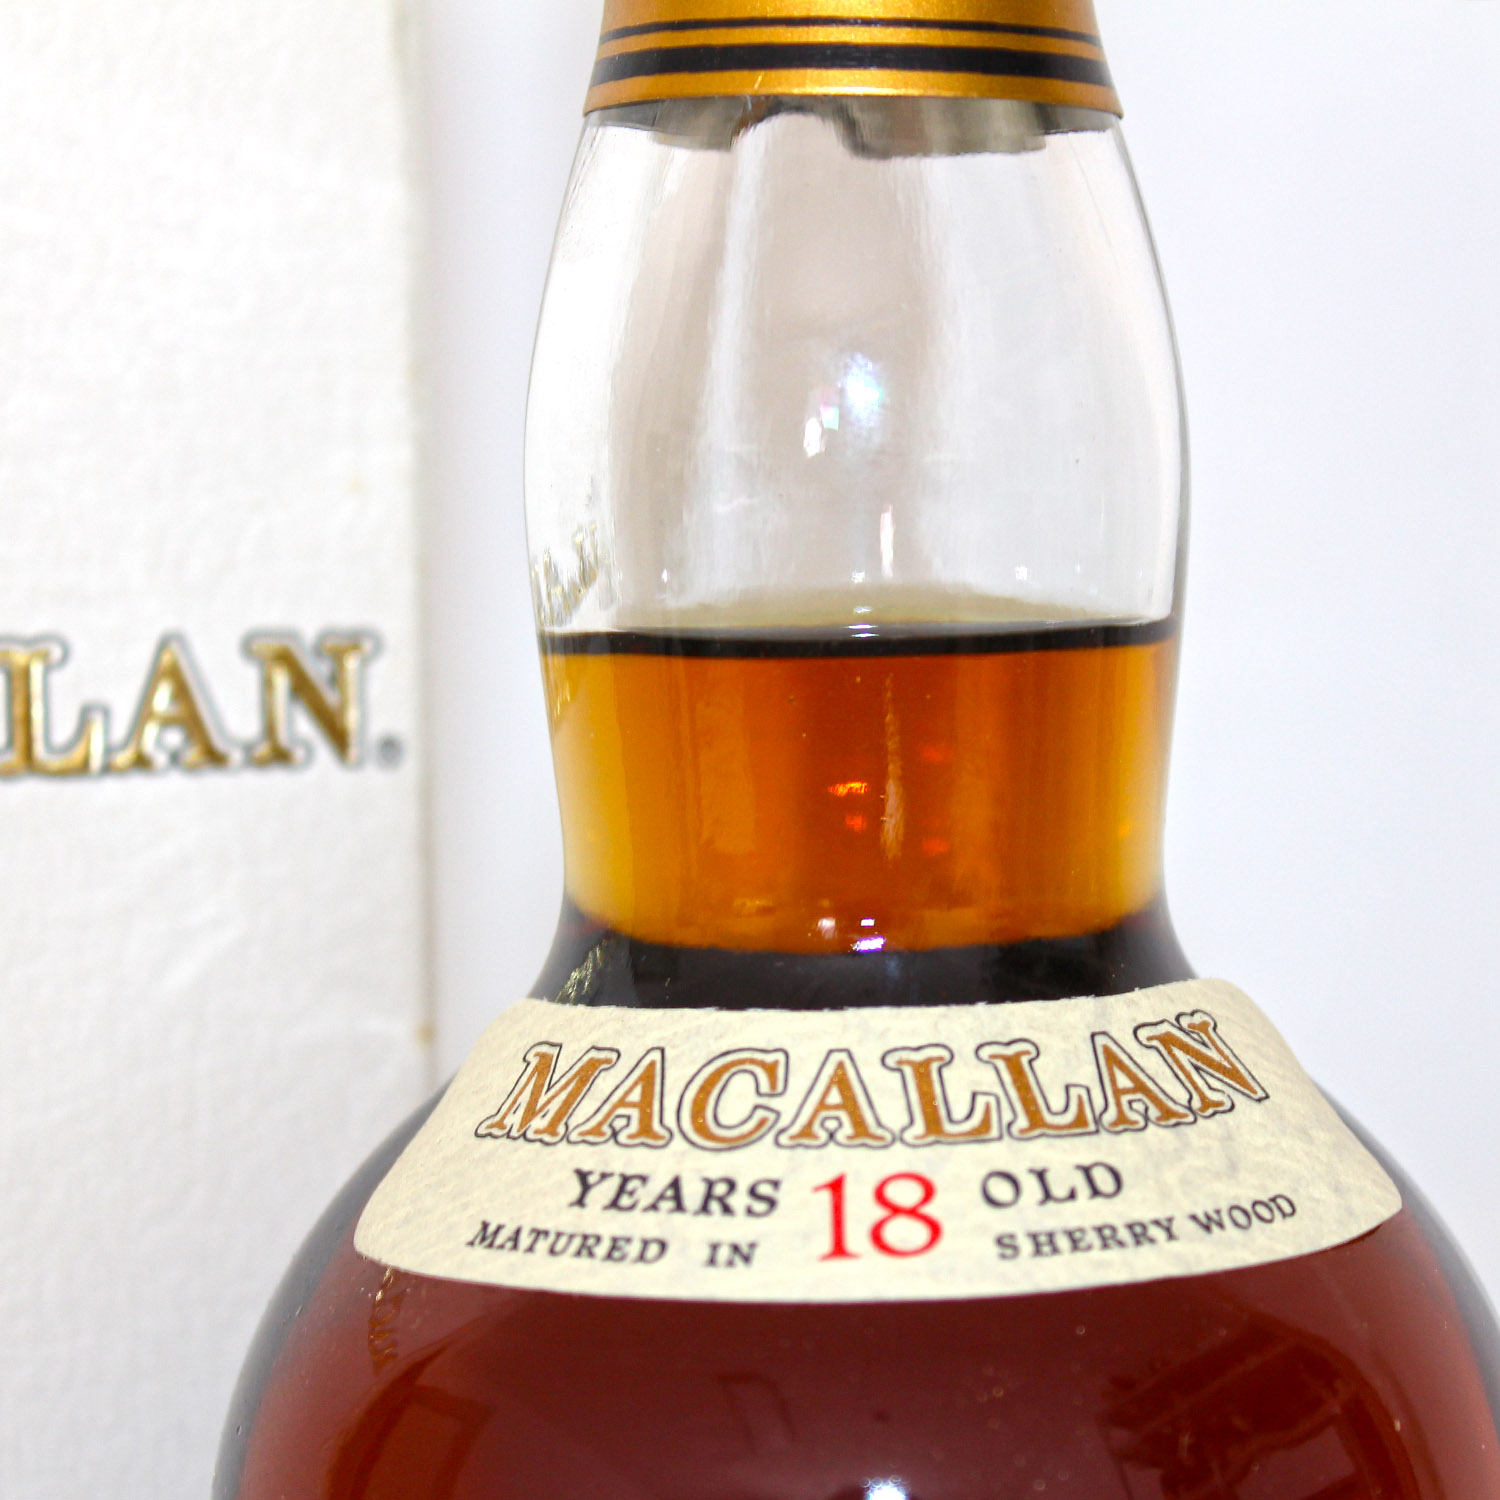 Macallan 1973 18 Years Old neck label